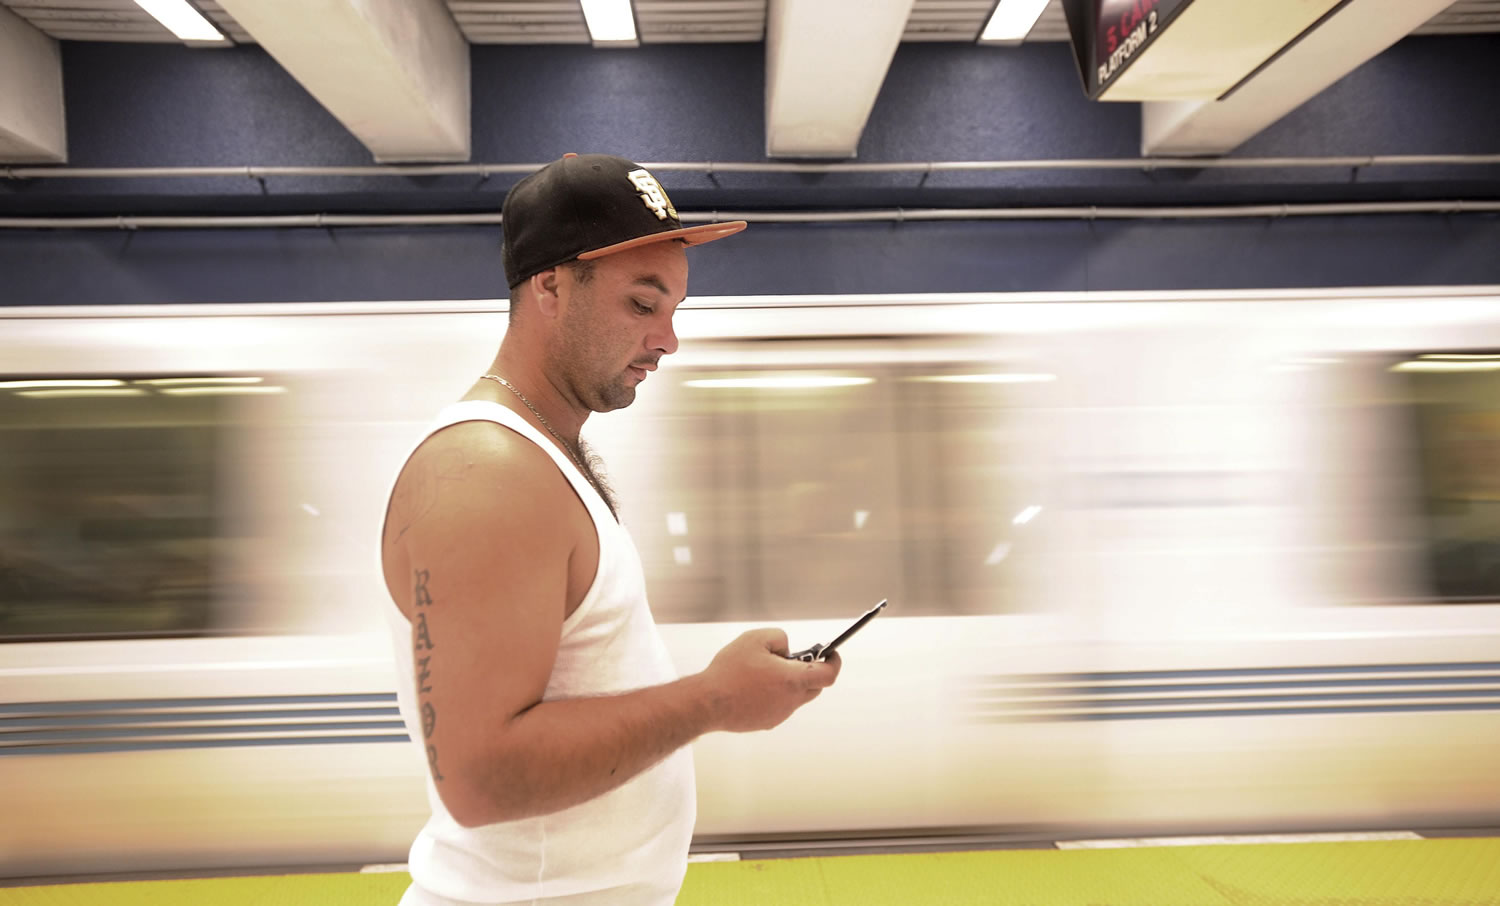 Drew Rojas checks his cell phone while waiting for a BART train at San Francisco's Civic Center station on Saturday.